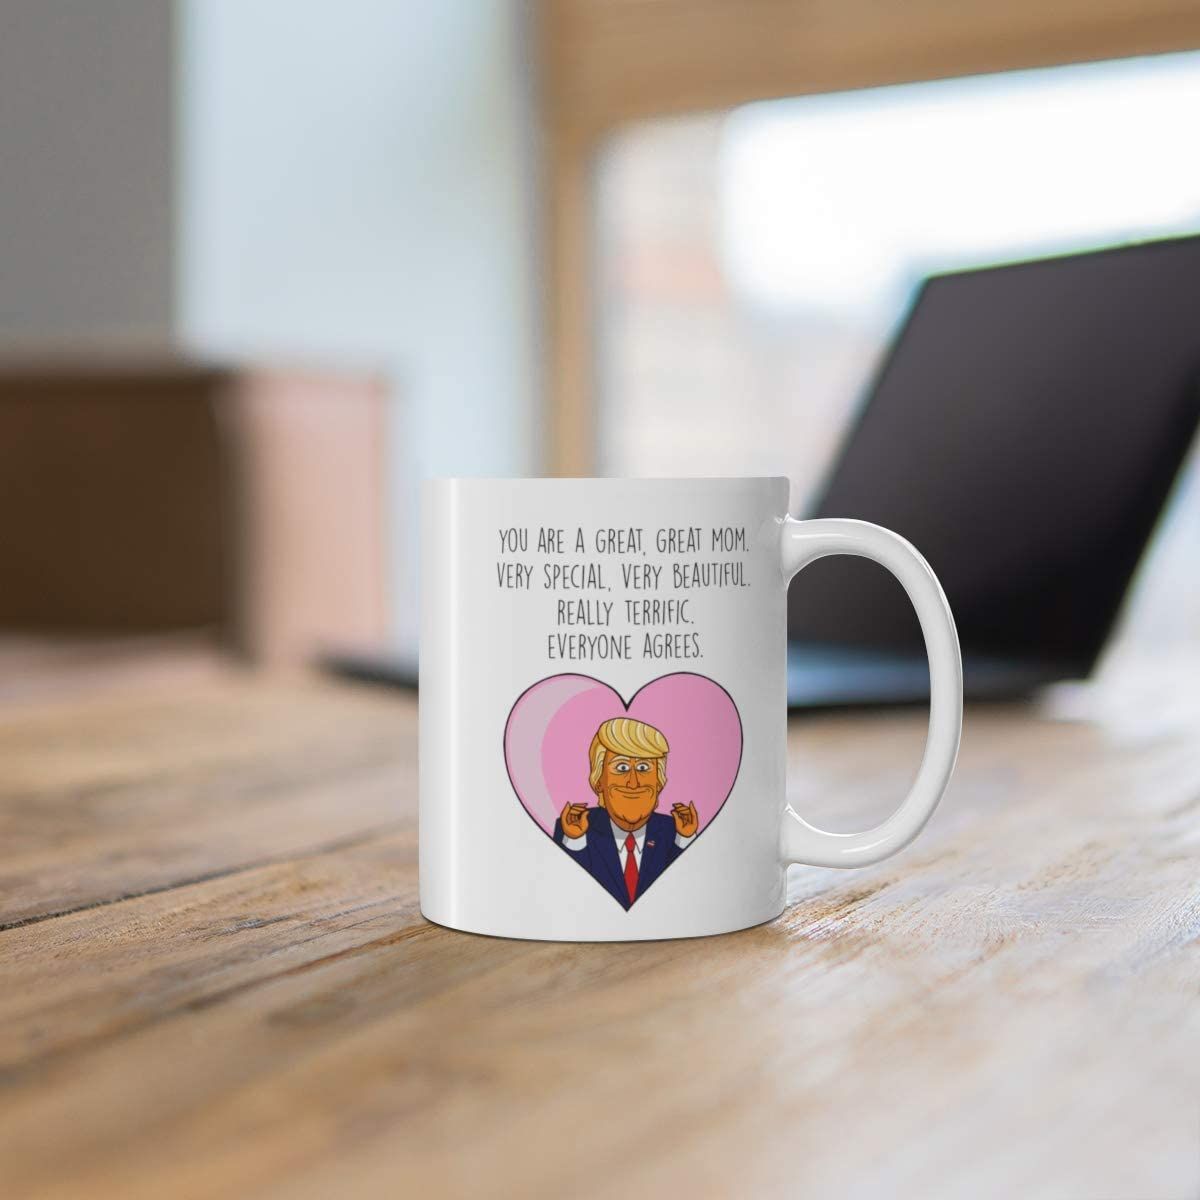 You Are a Great Mom Very Special Beautiful Really Terrific Everyone Agrees Coffee Mug Funny Mothers Day Gift Birthday Cup